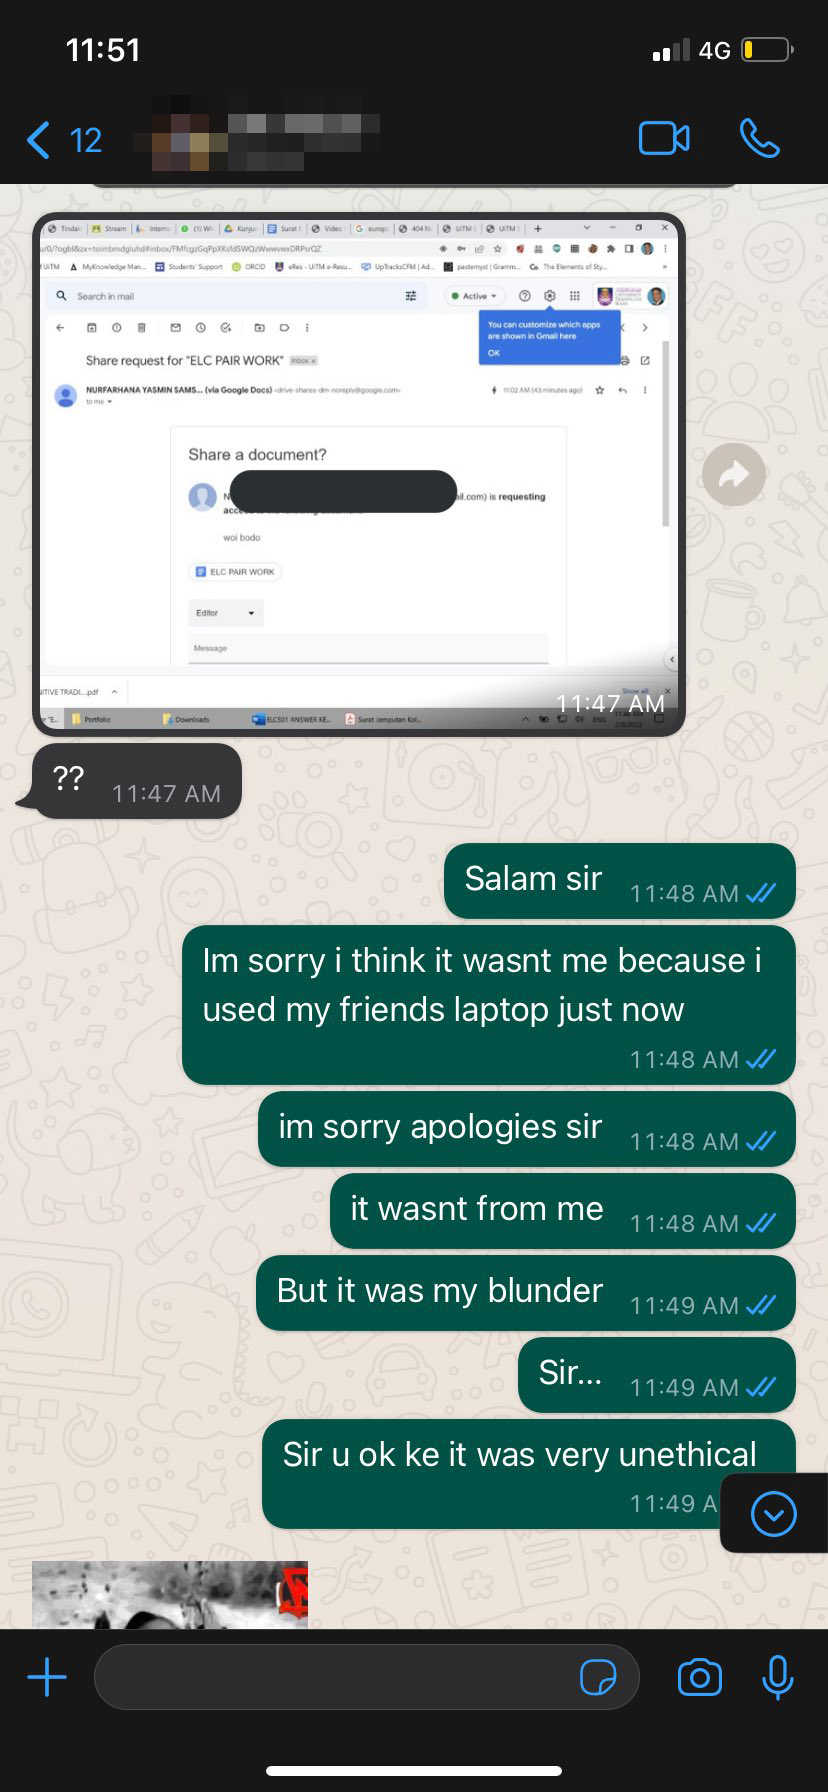 Local student Yasmin accidentally addressed her lecturer as 'bodo' in a hilarious blunder. Image credit: samsuydin